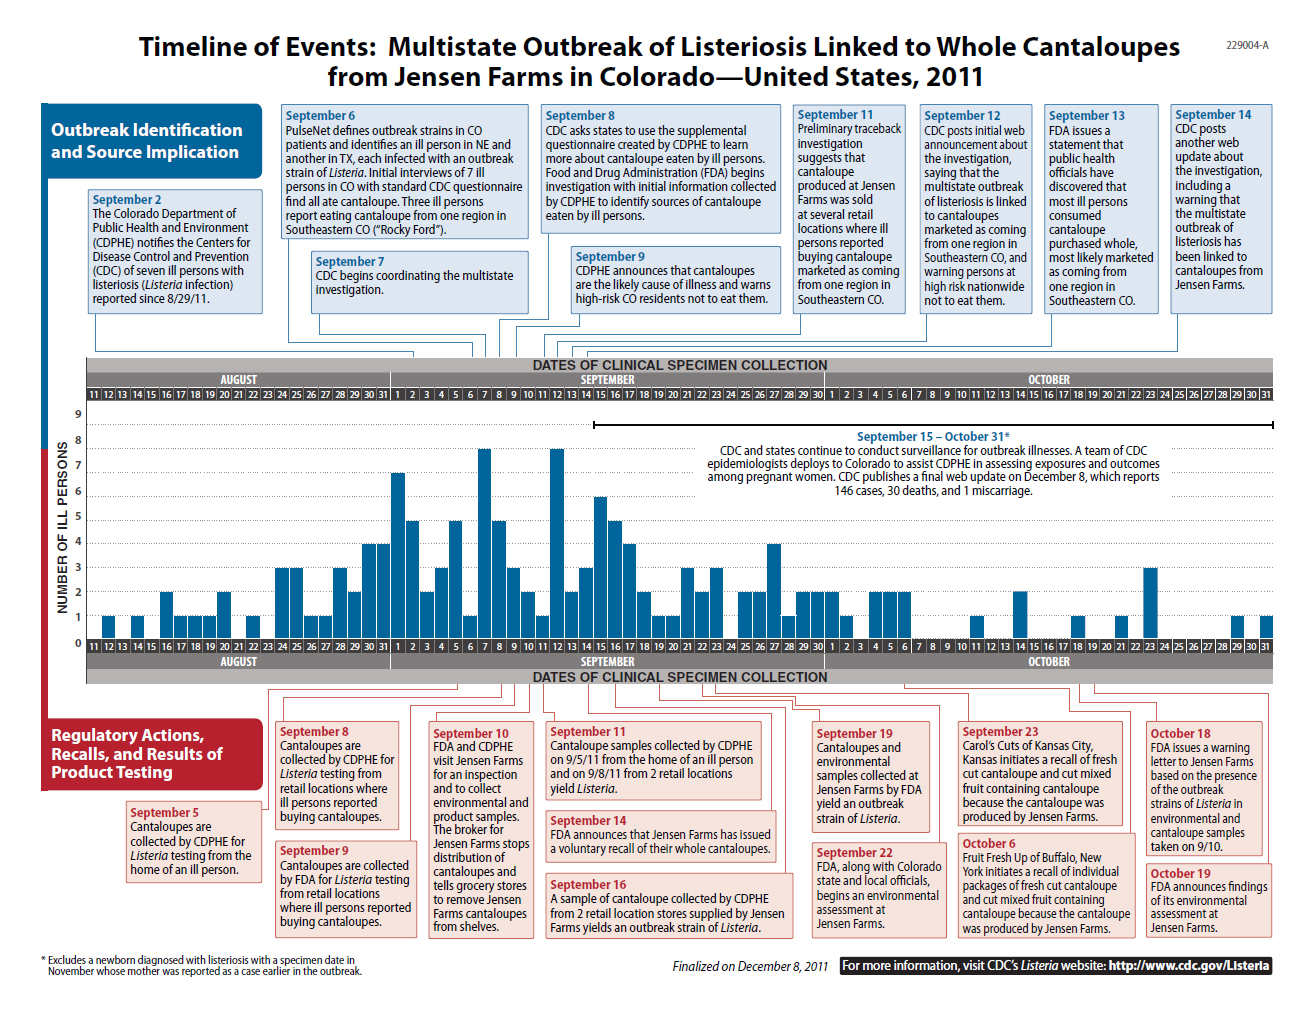 Two bar charts displaying the timeline of events related to the multistate outbreak of Listeriosis linked to whole cantaloupes from Jensen Farms, Colorado